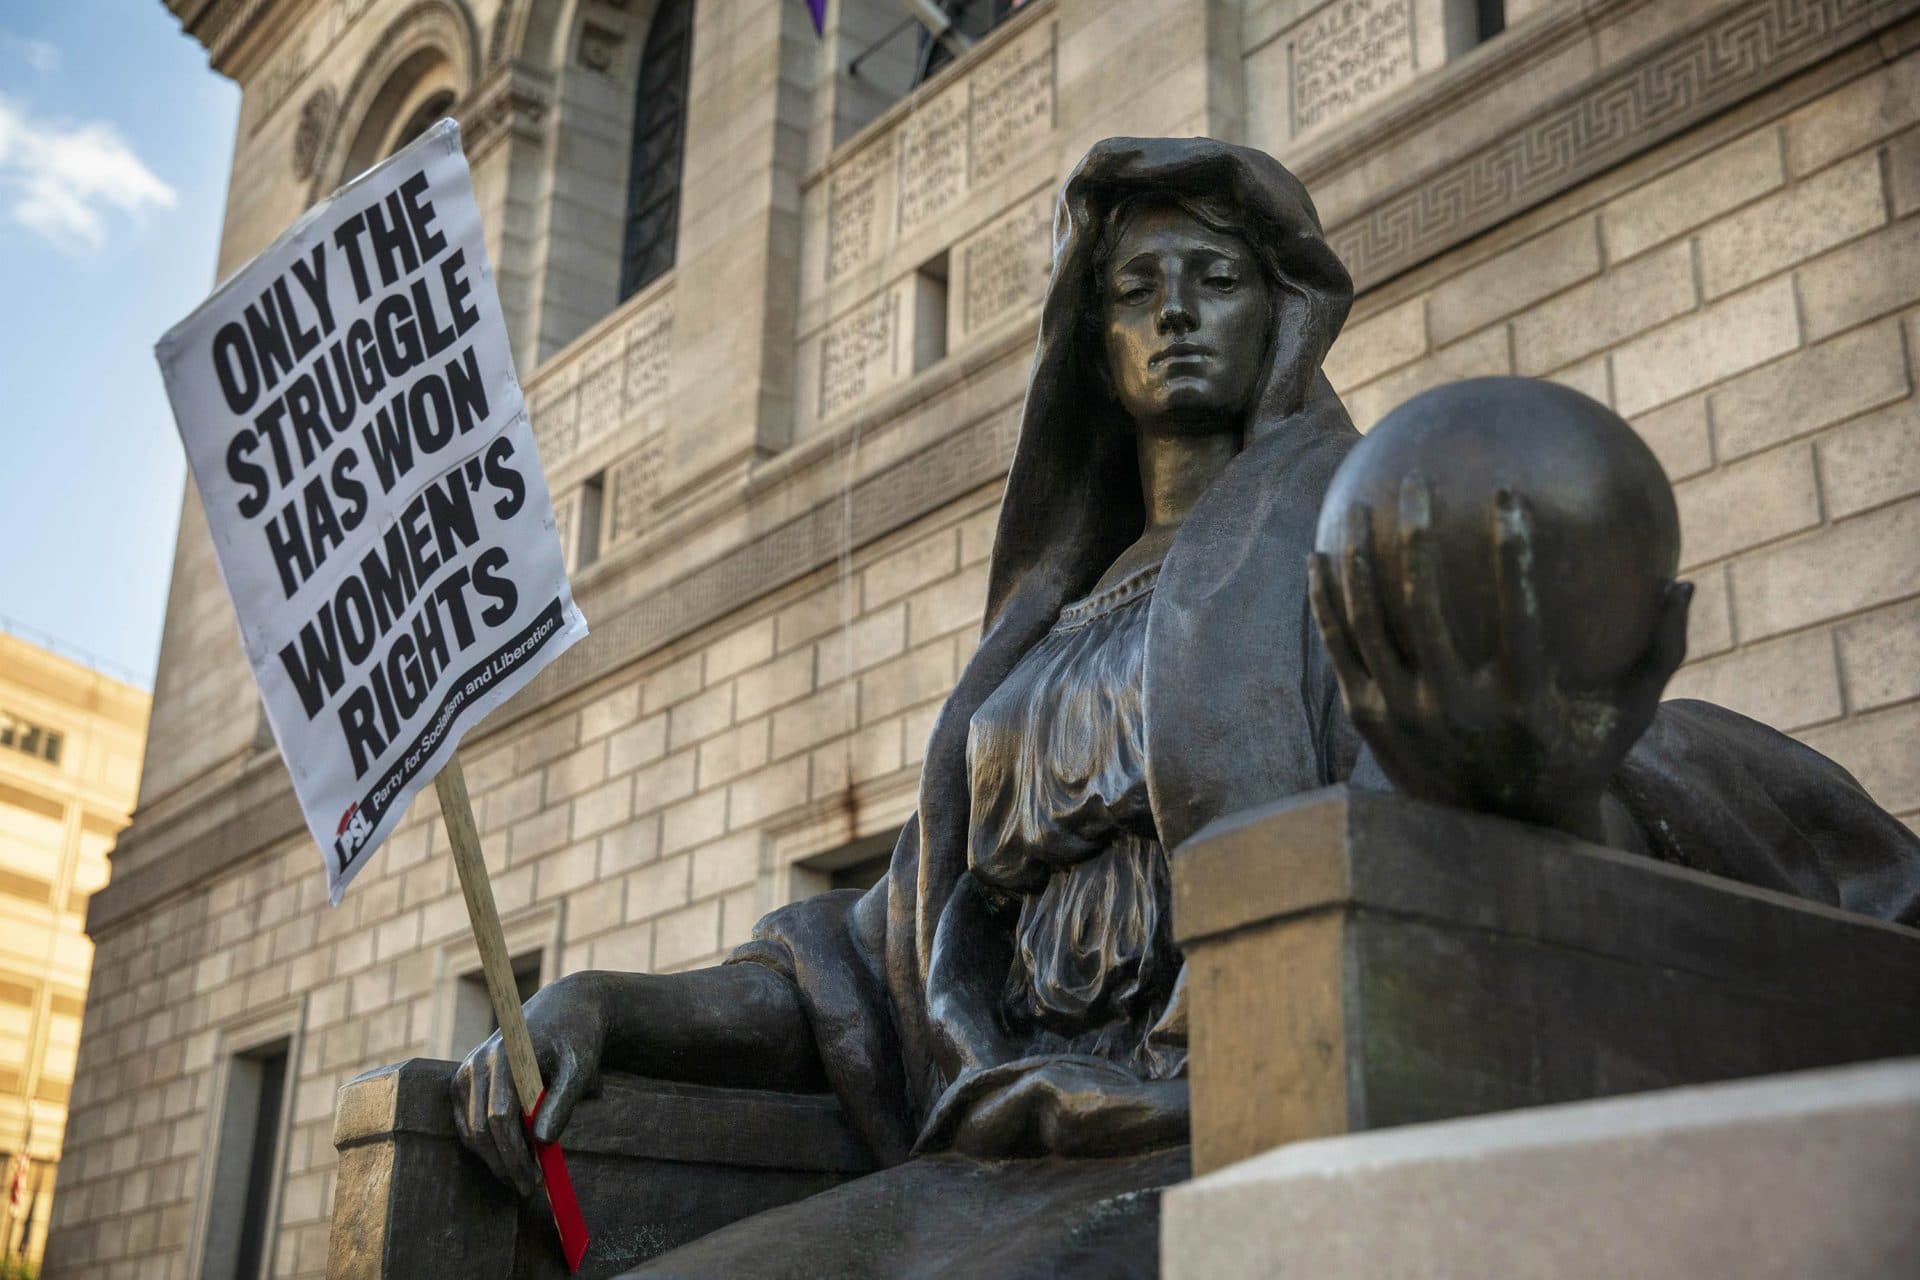 Abortion-rights protesters left one of their signs with one of the statues in front of Boston Public Library. (Robin Lubbock/WBUR)